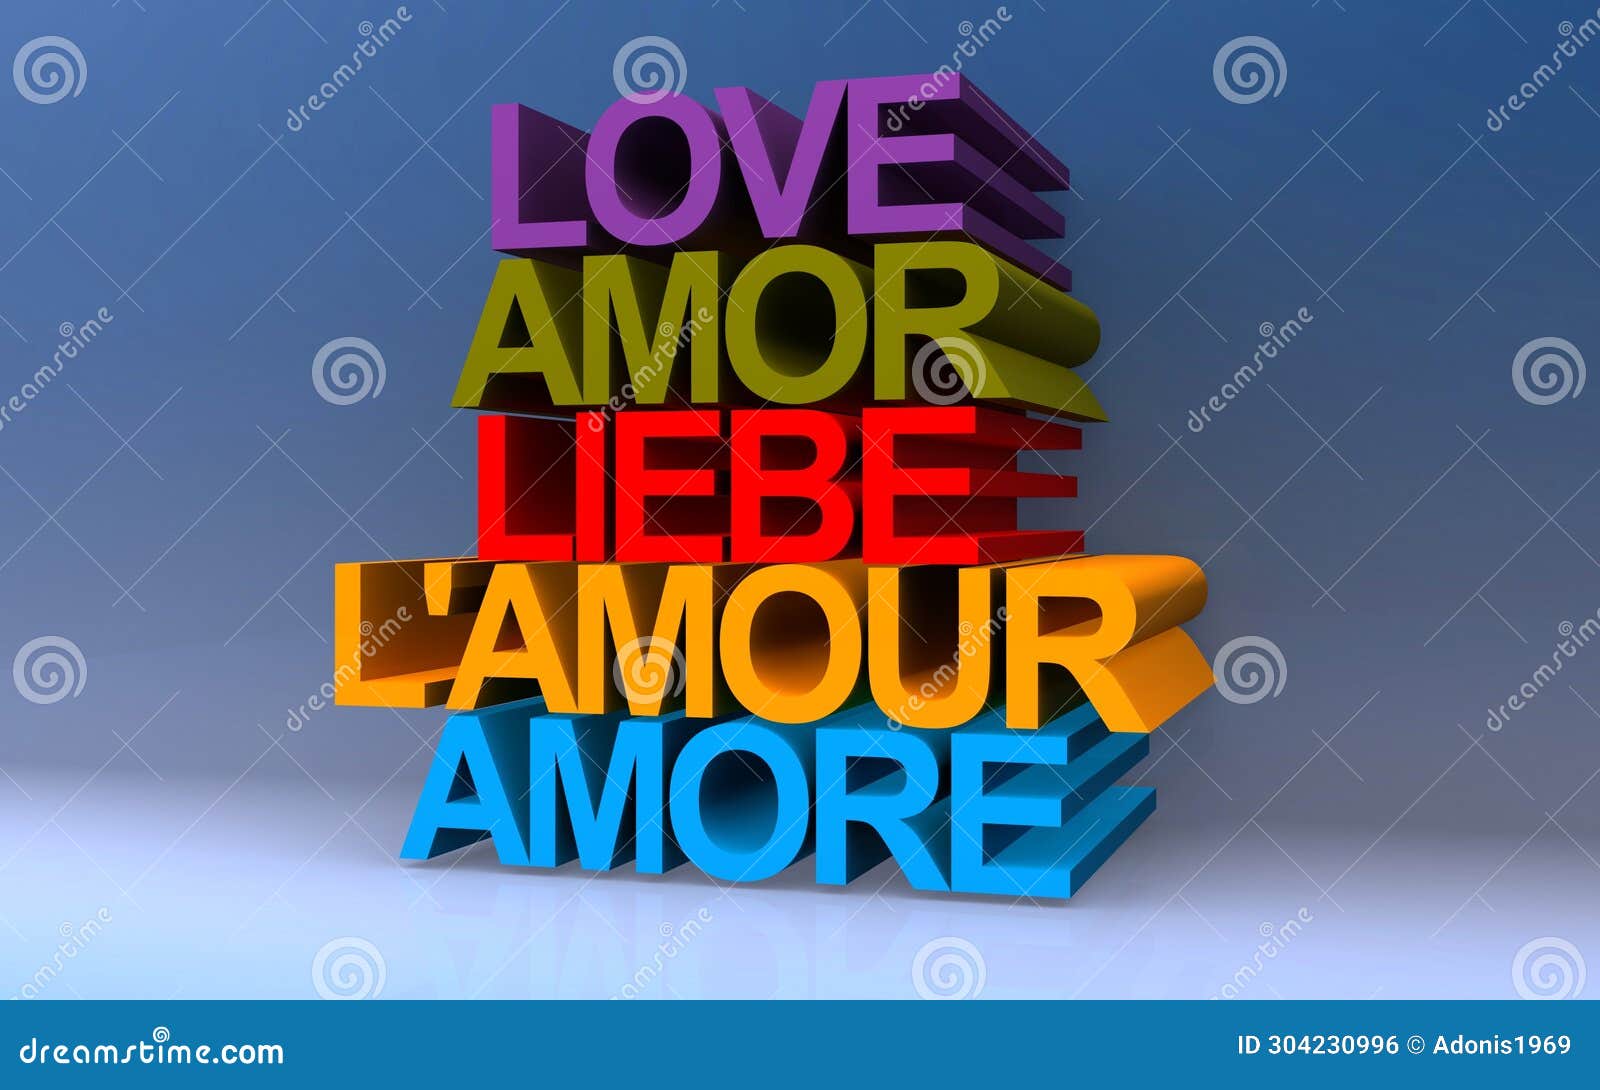 love amor liebe l'amour amore on blue